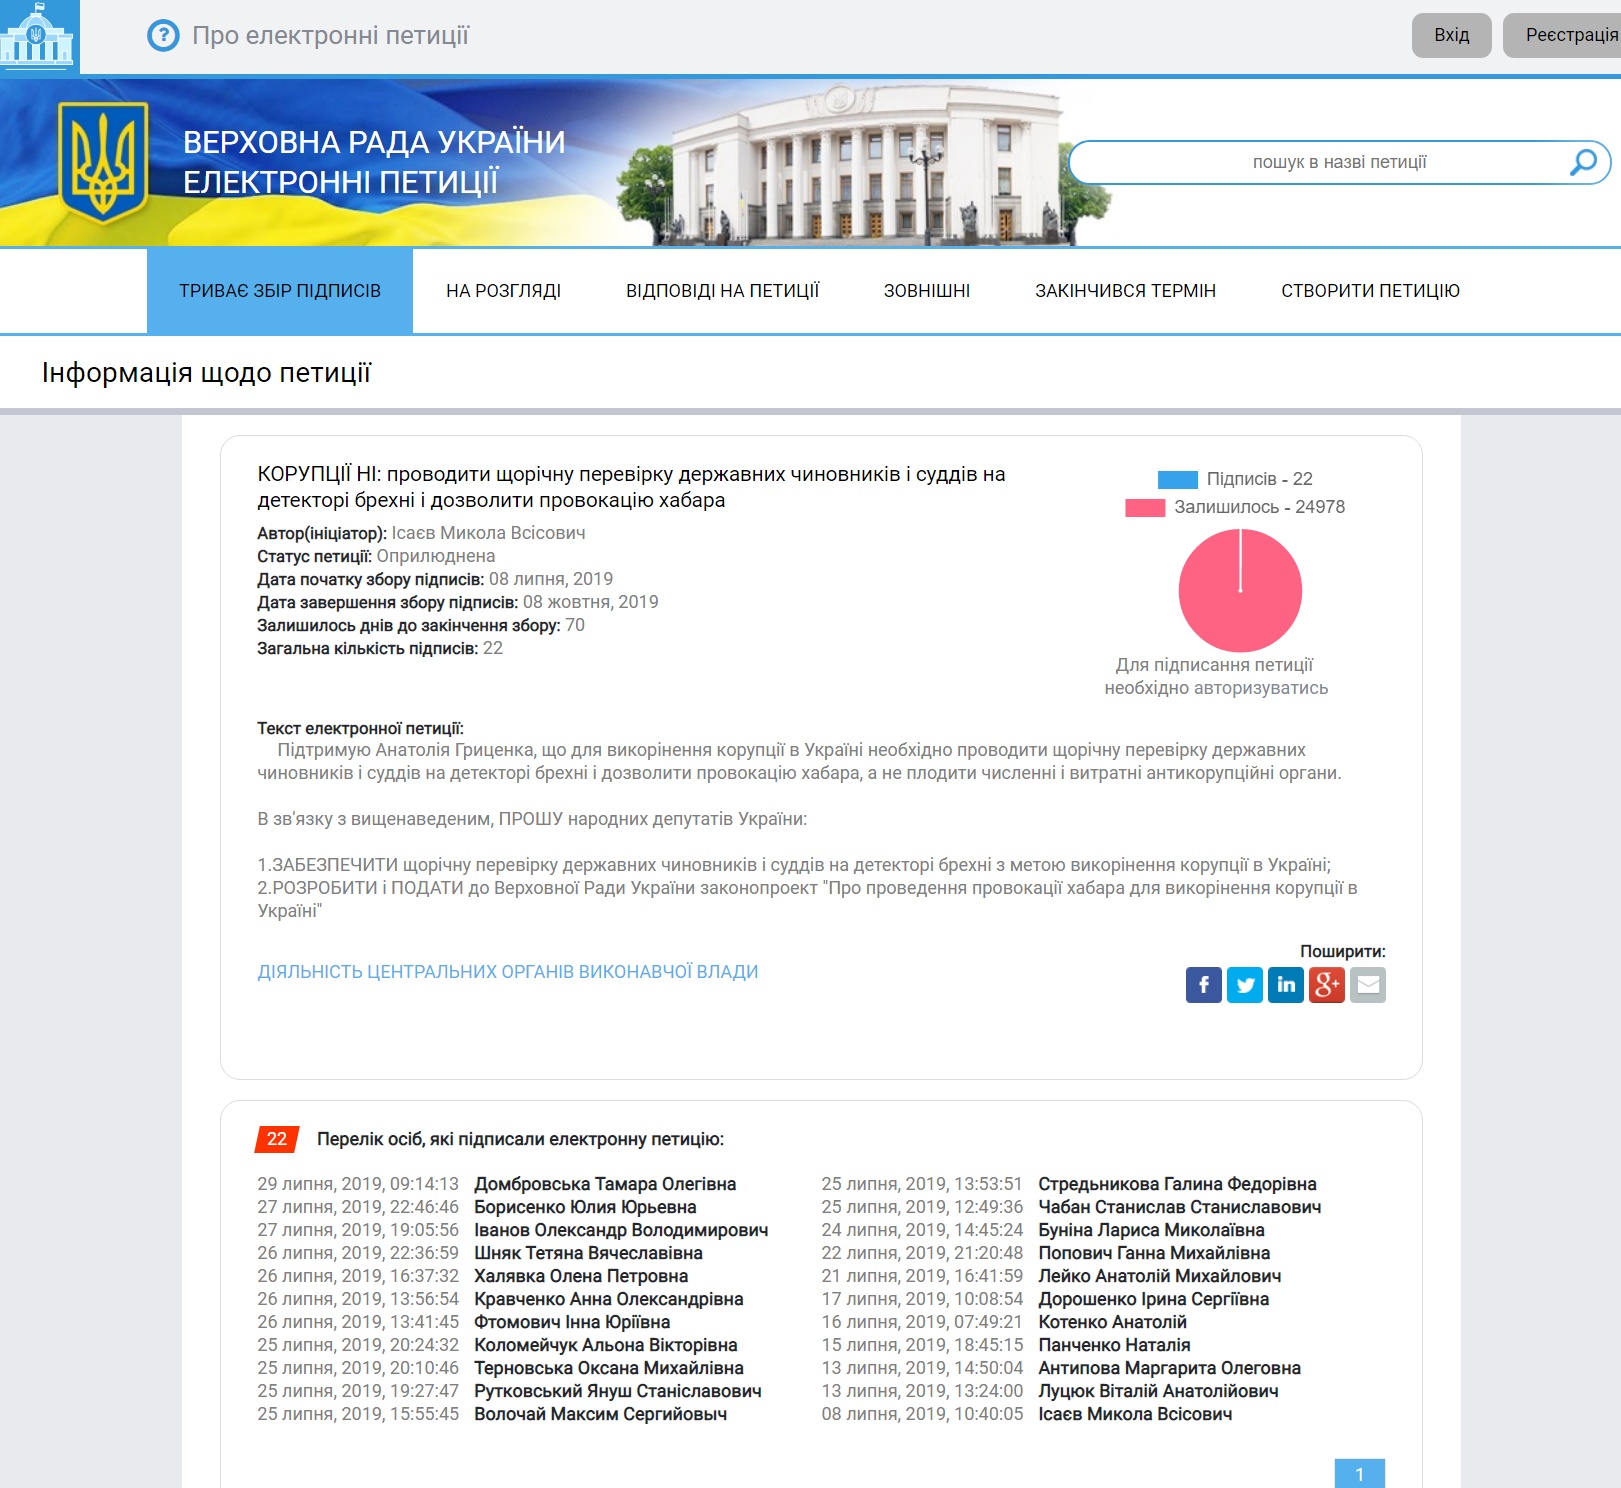 https://itd.rada.gov.ua/services/Petition/Index/6149?aname=published